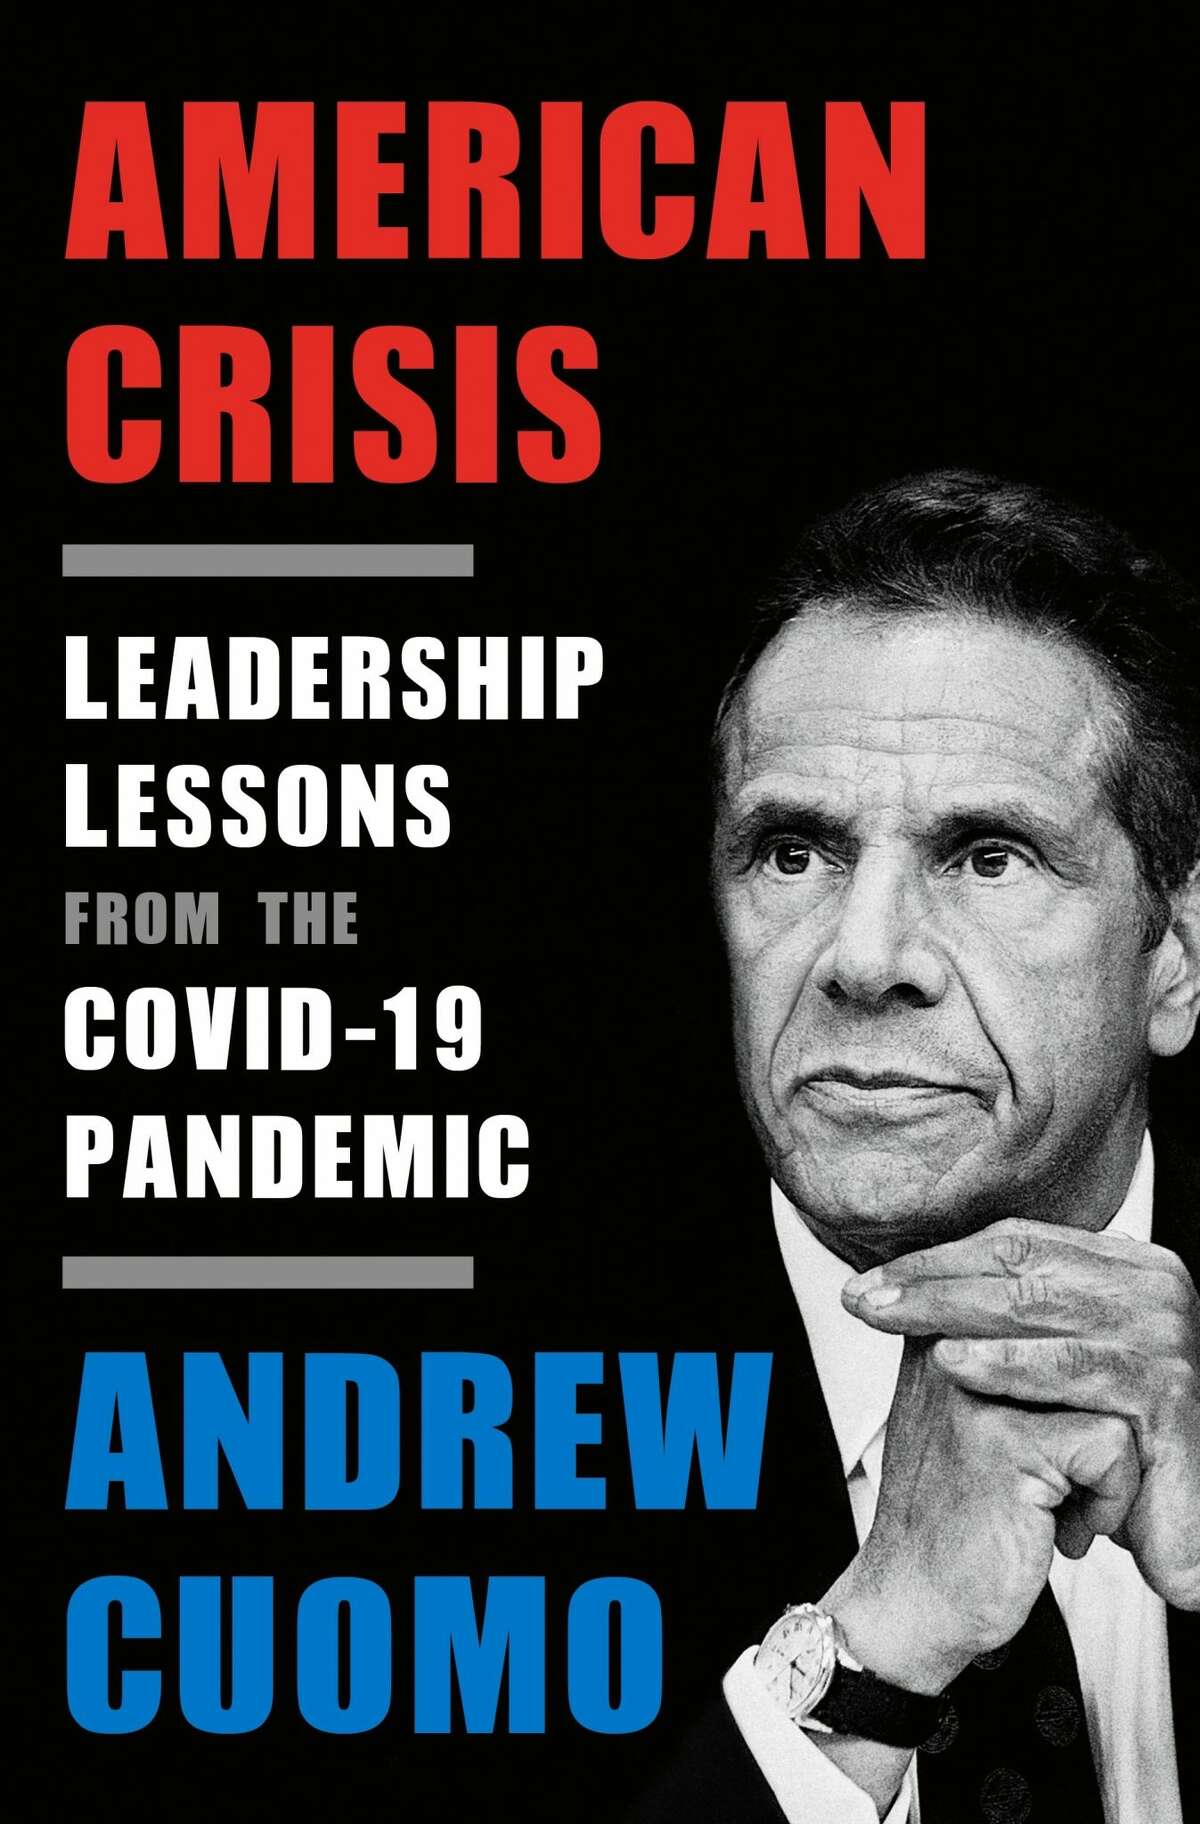 This cover image released by Crown shows "American Crisis: Leadership Lessons From the Covid-19 Pandemic" by Andrew Cuomo. Crown announced Thursday that the book will be released Oct. 13. (Crown via AP)